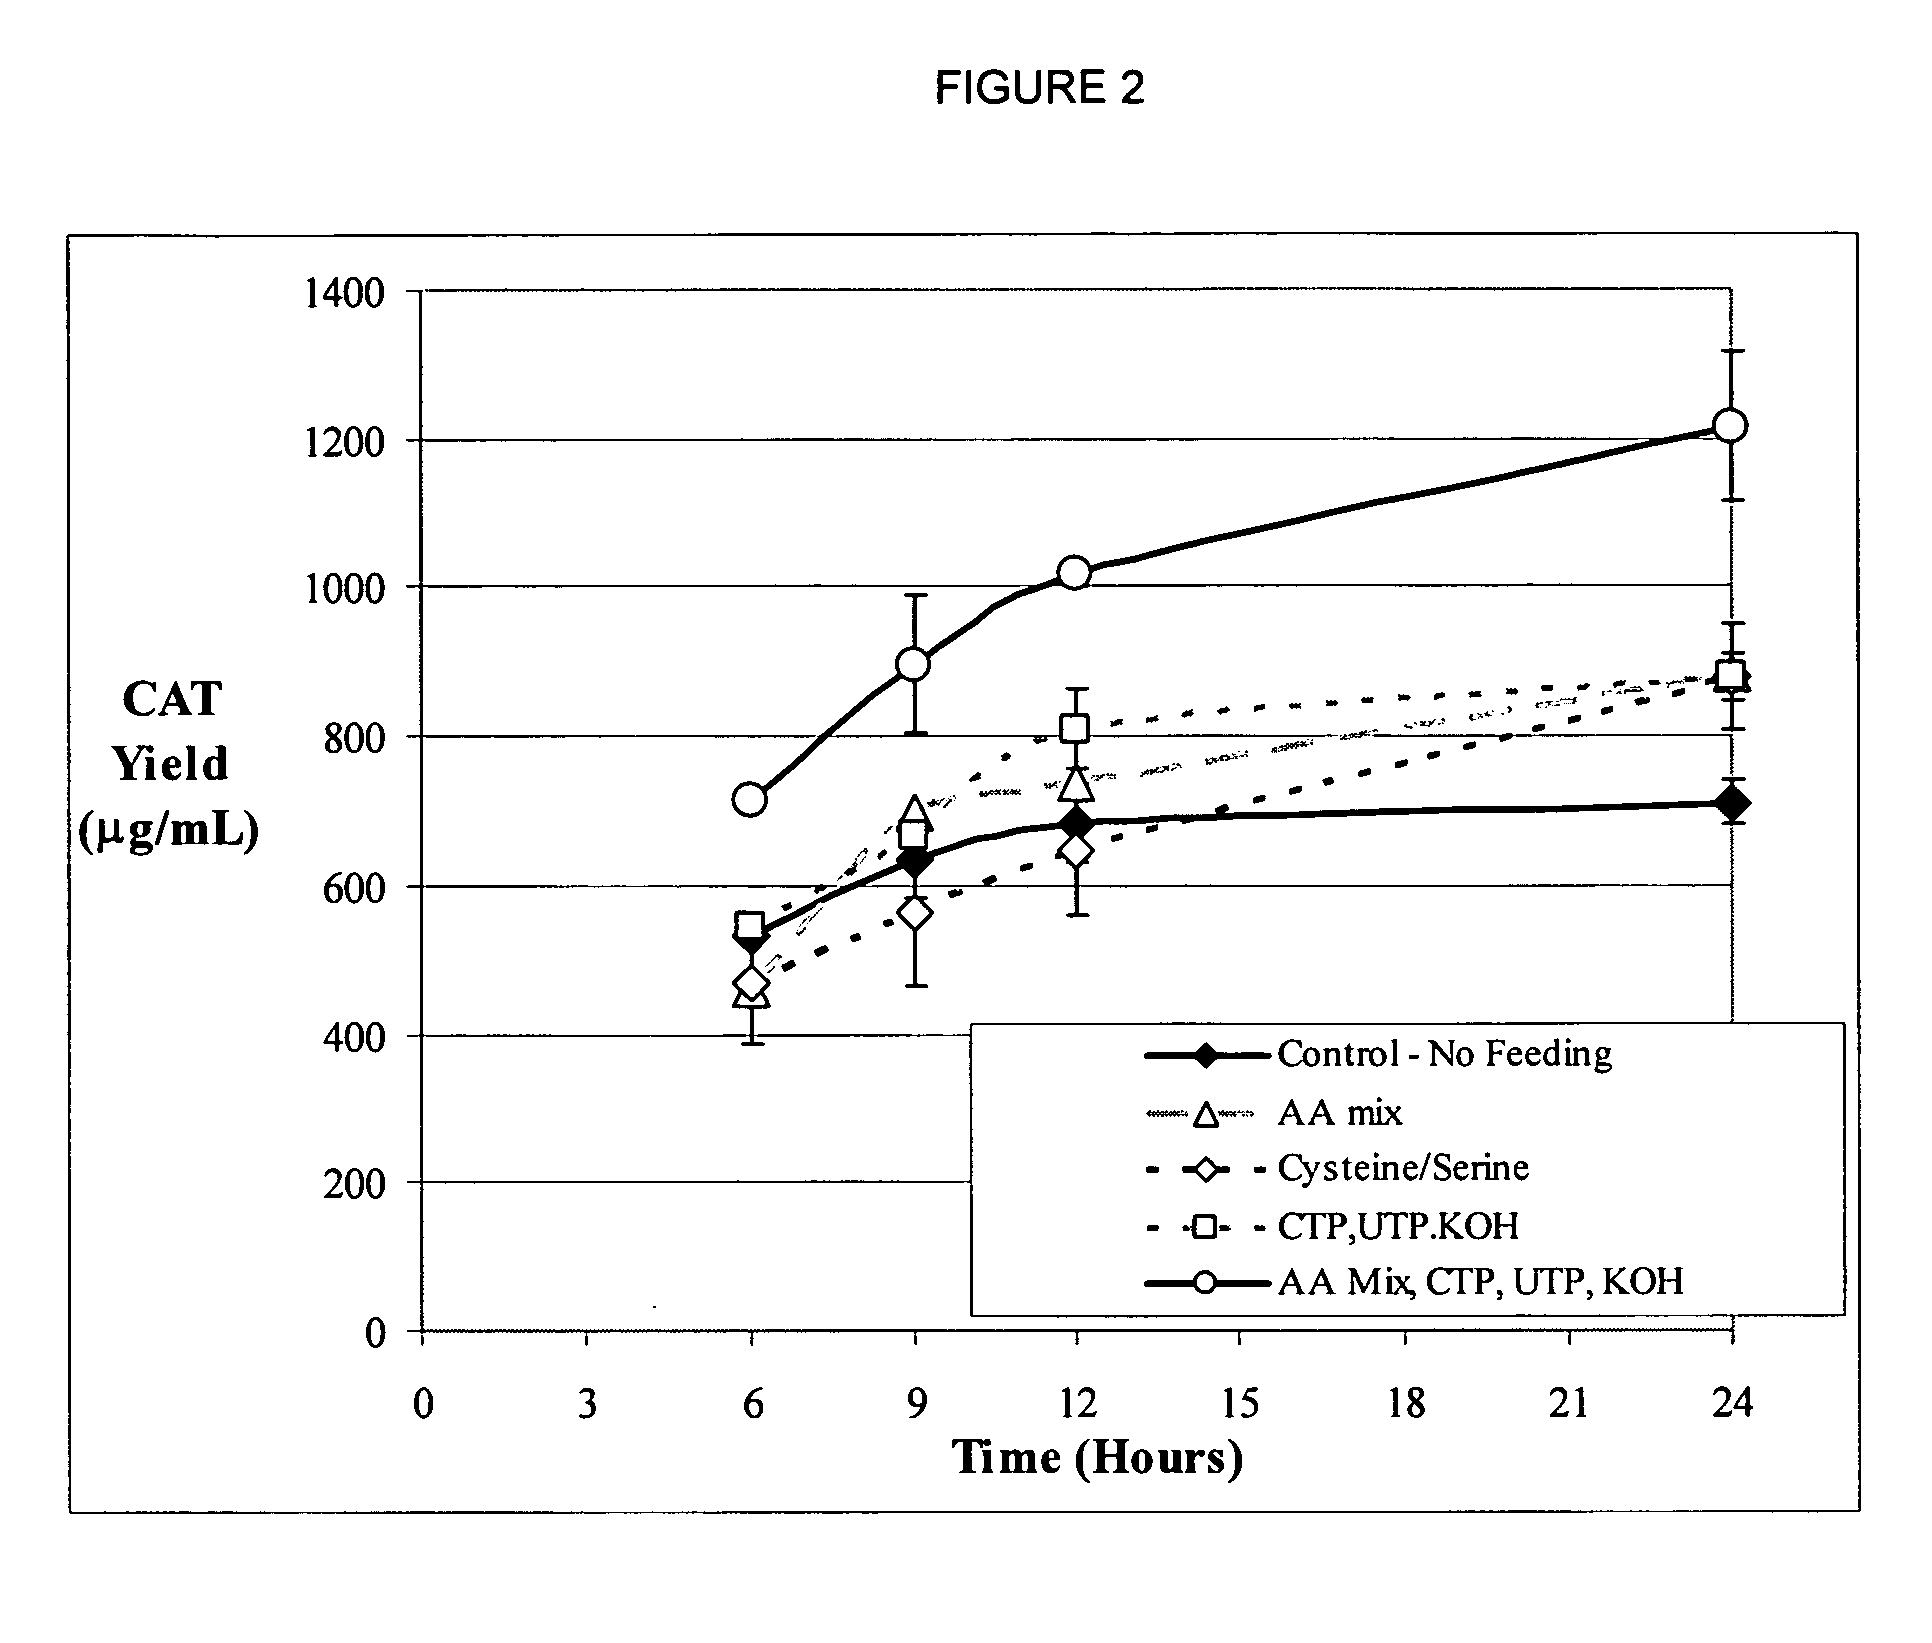 Method of alleviating nucleotide limitations for in vitro protein synthesis